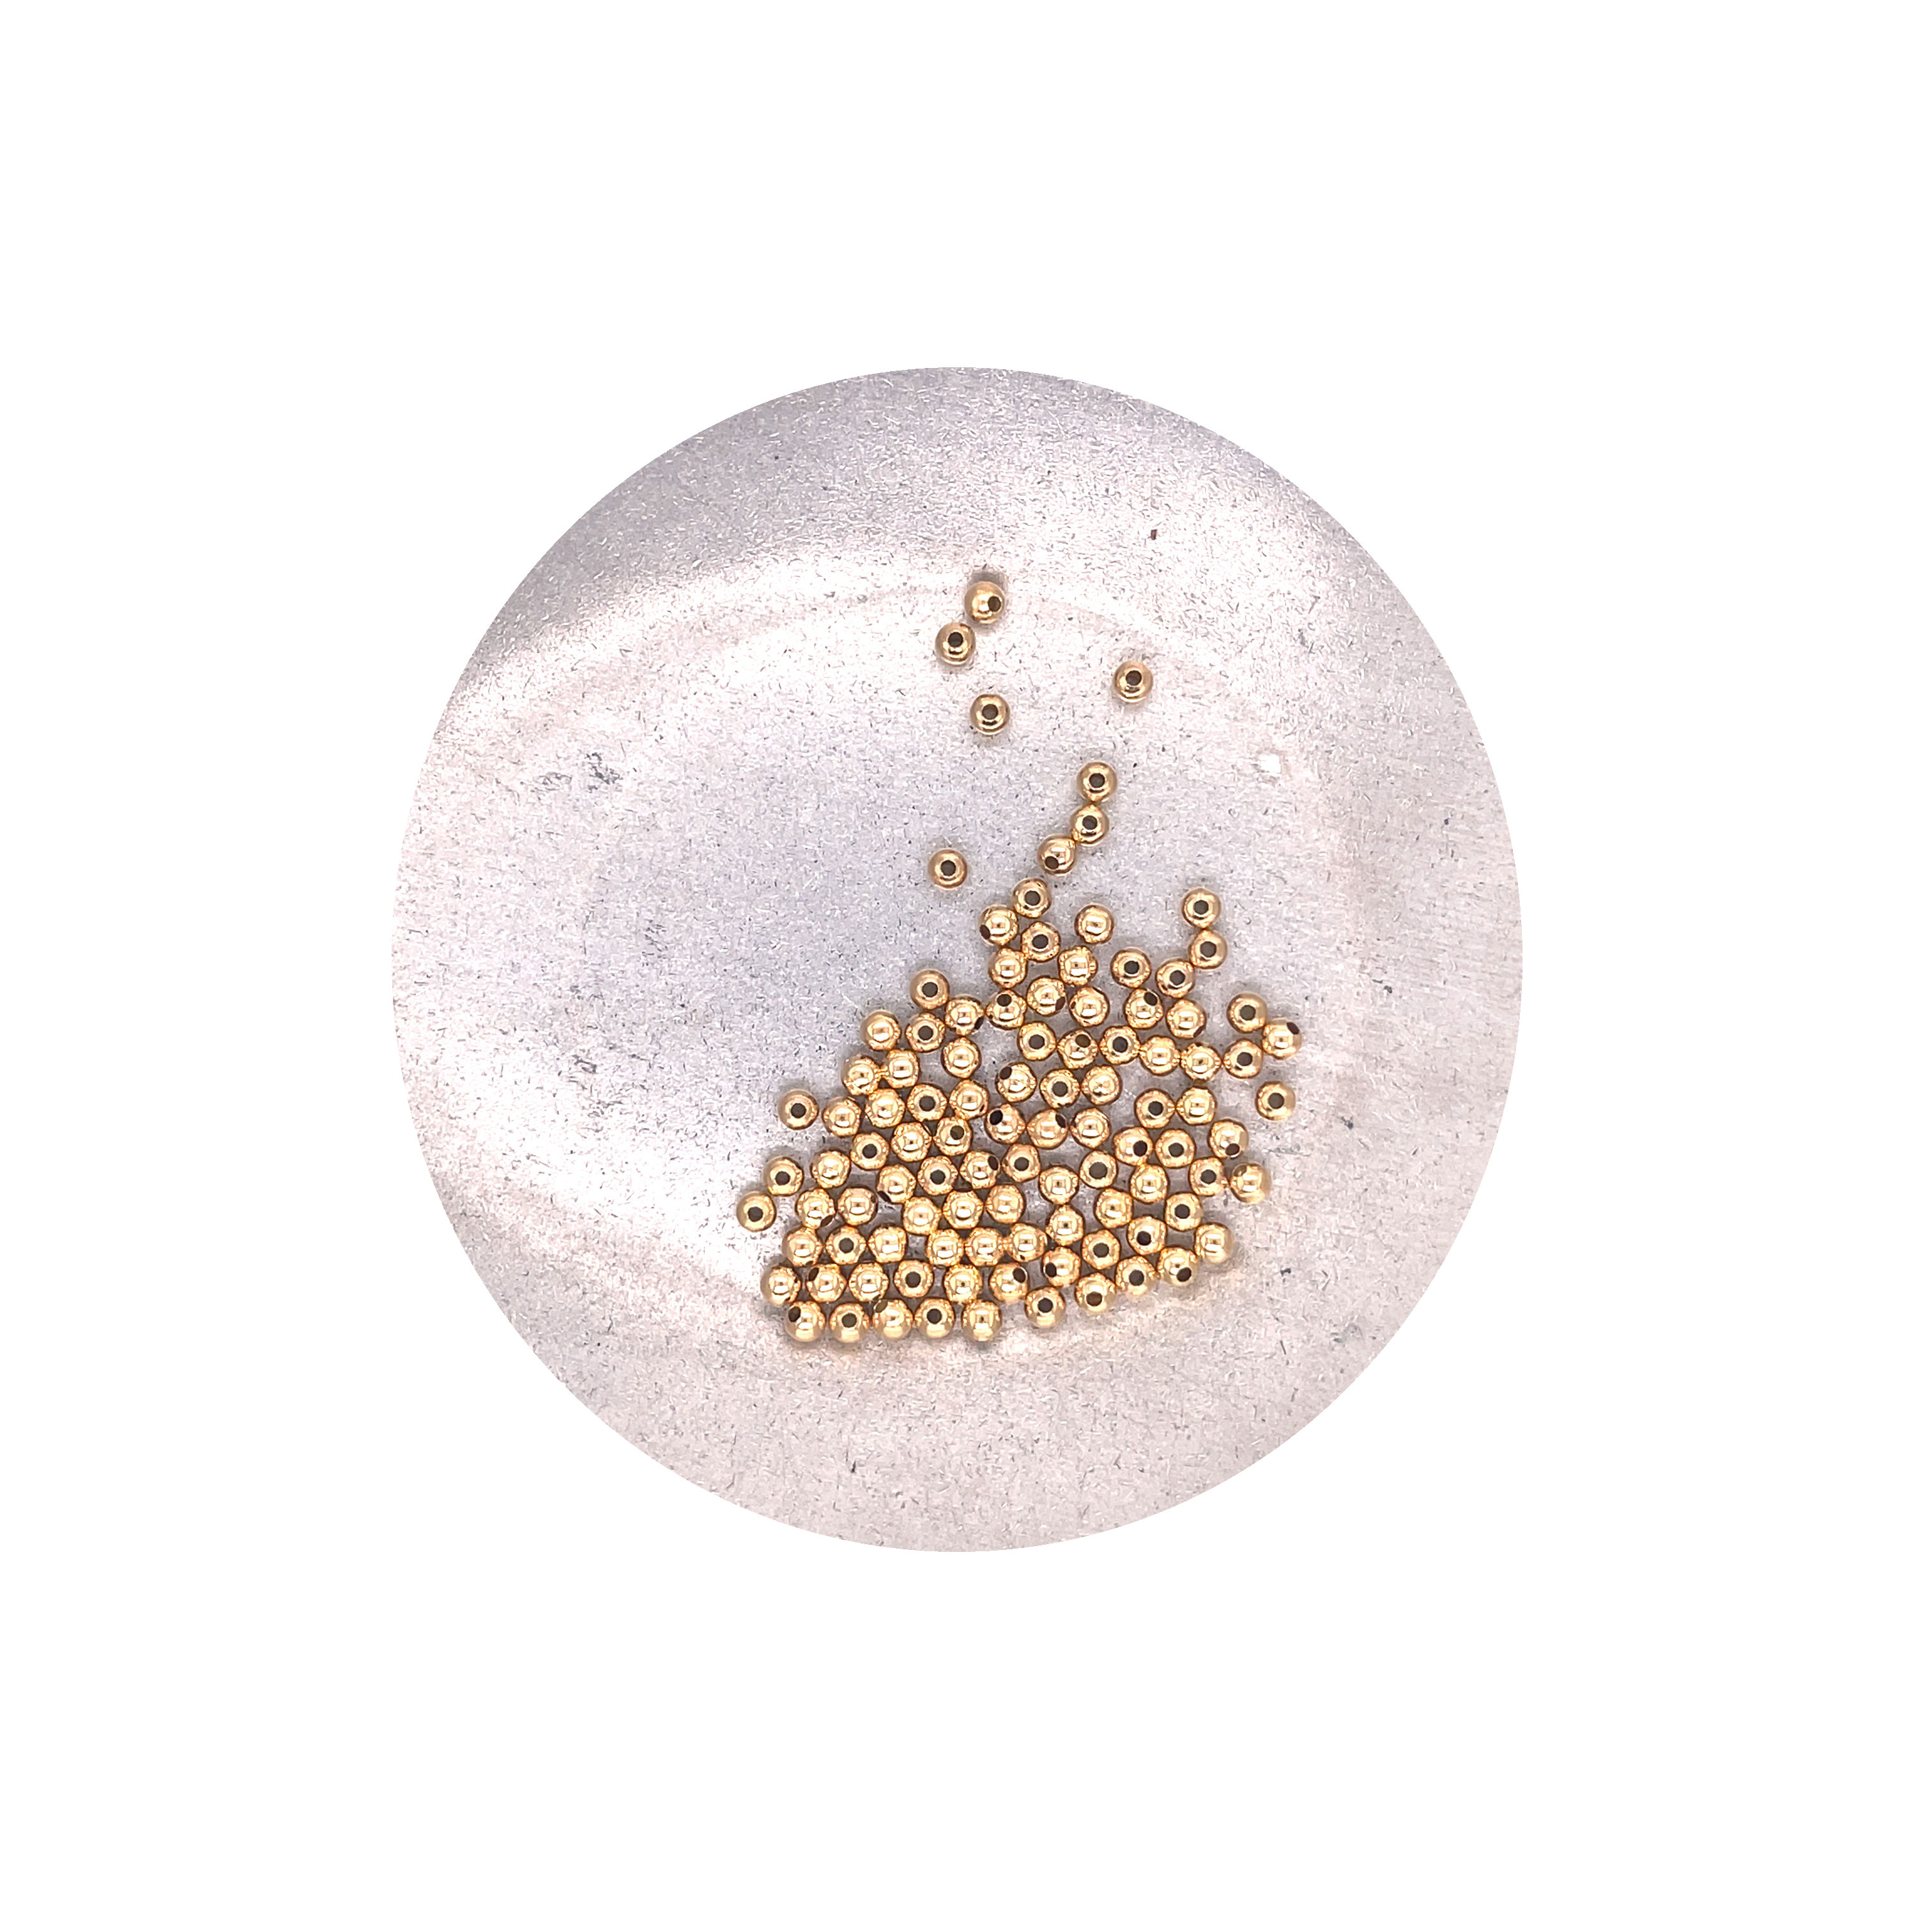 3mm 18K Gold Filled Beads - Pack of 100